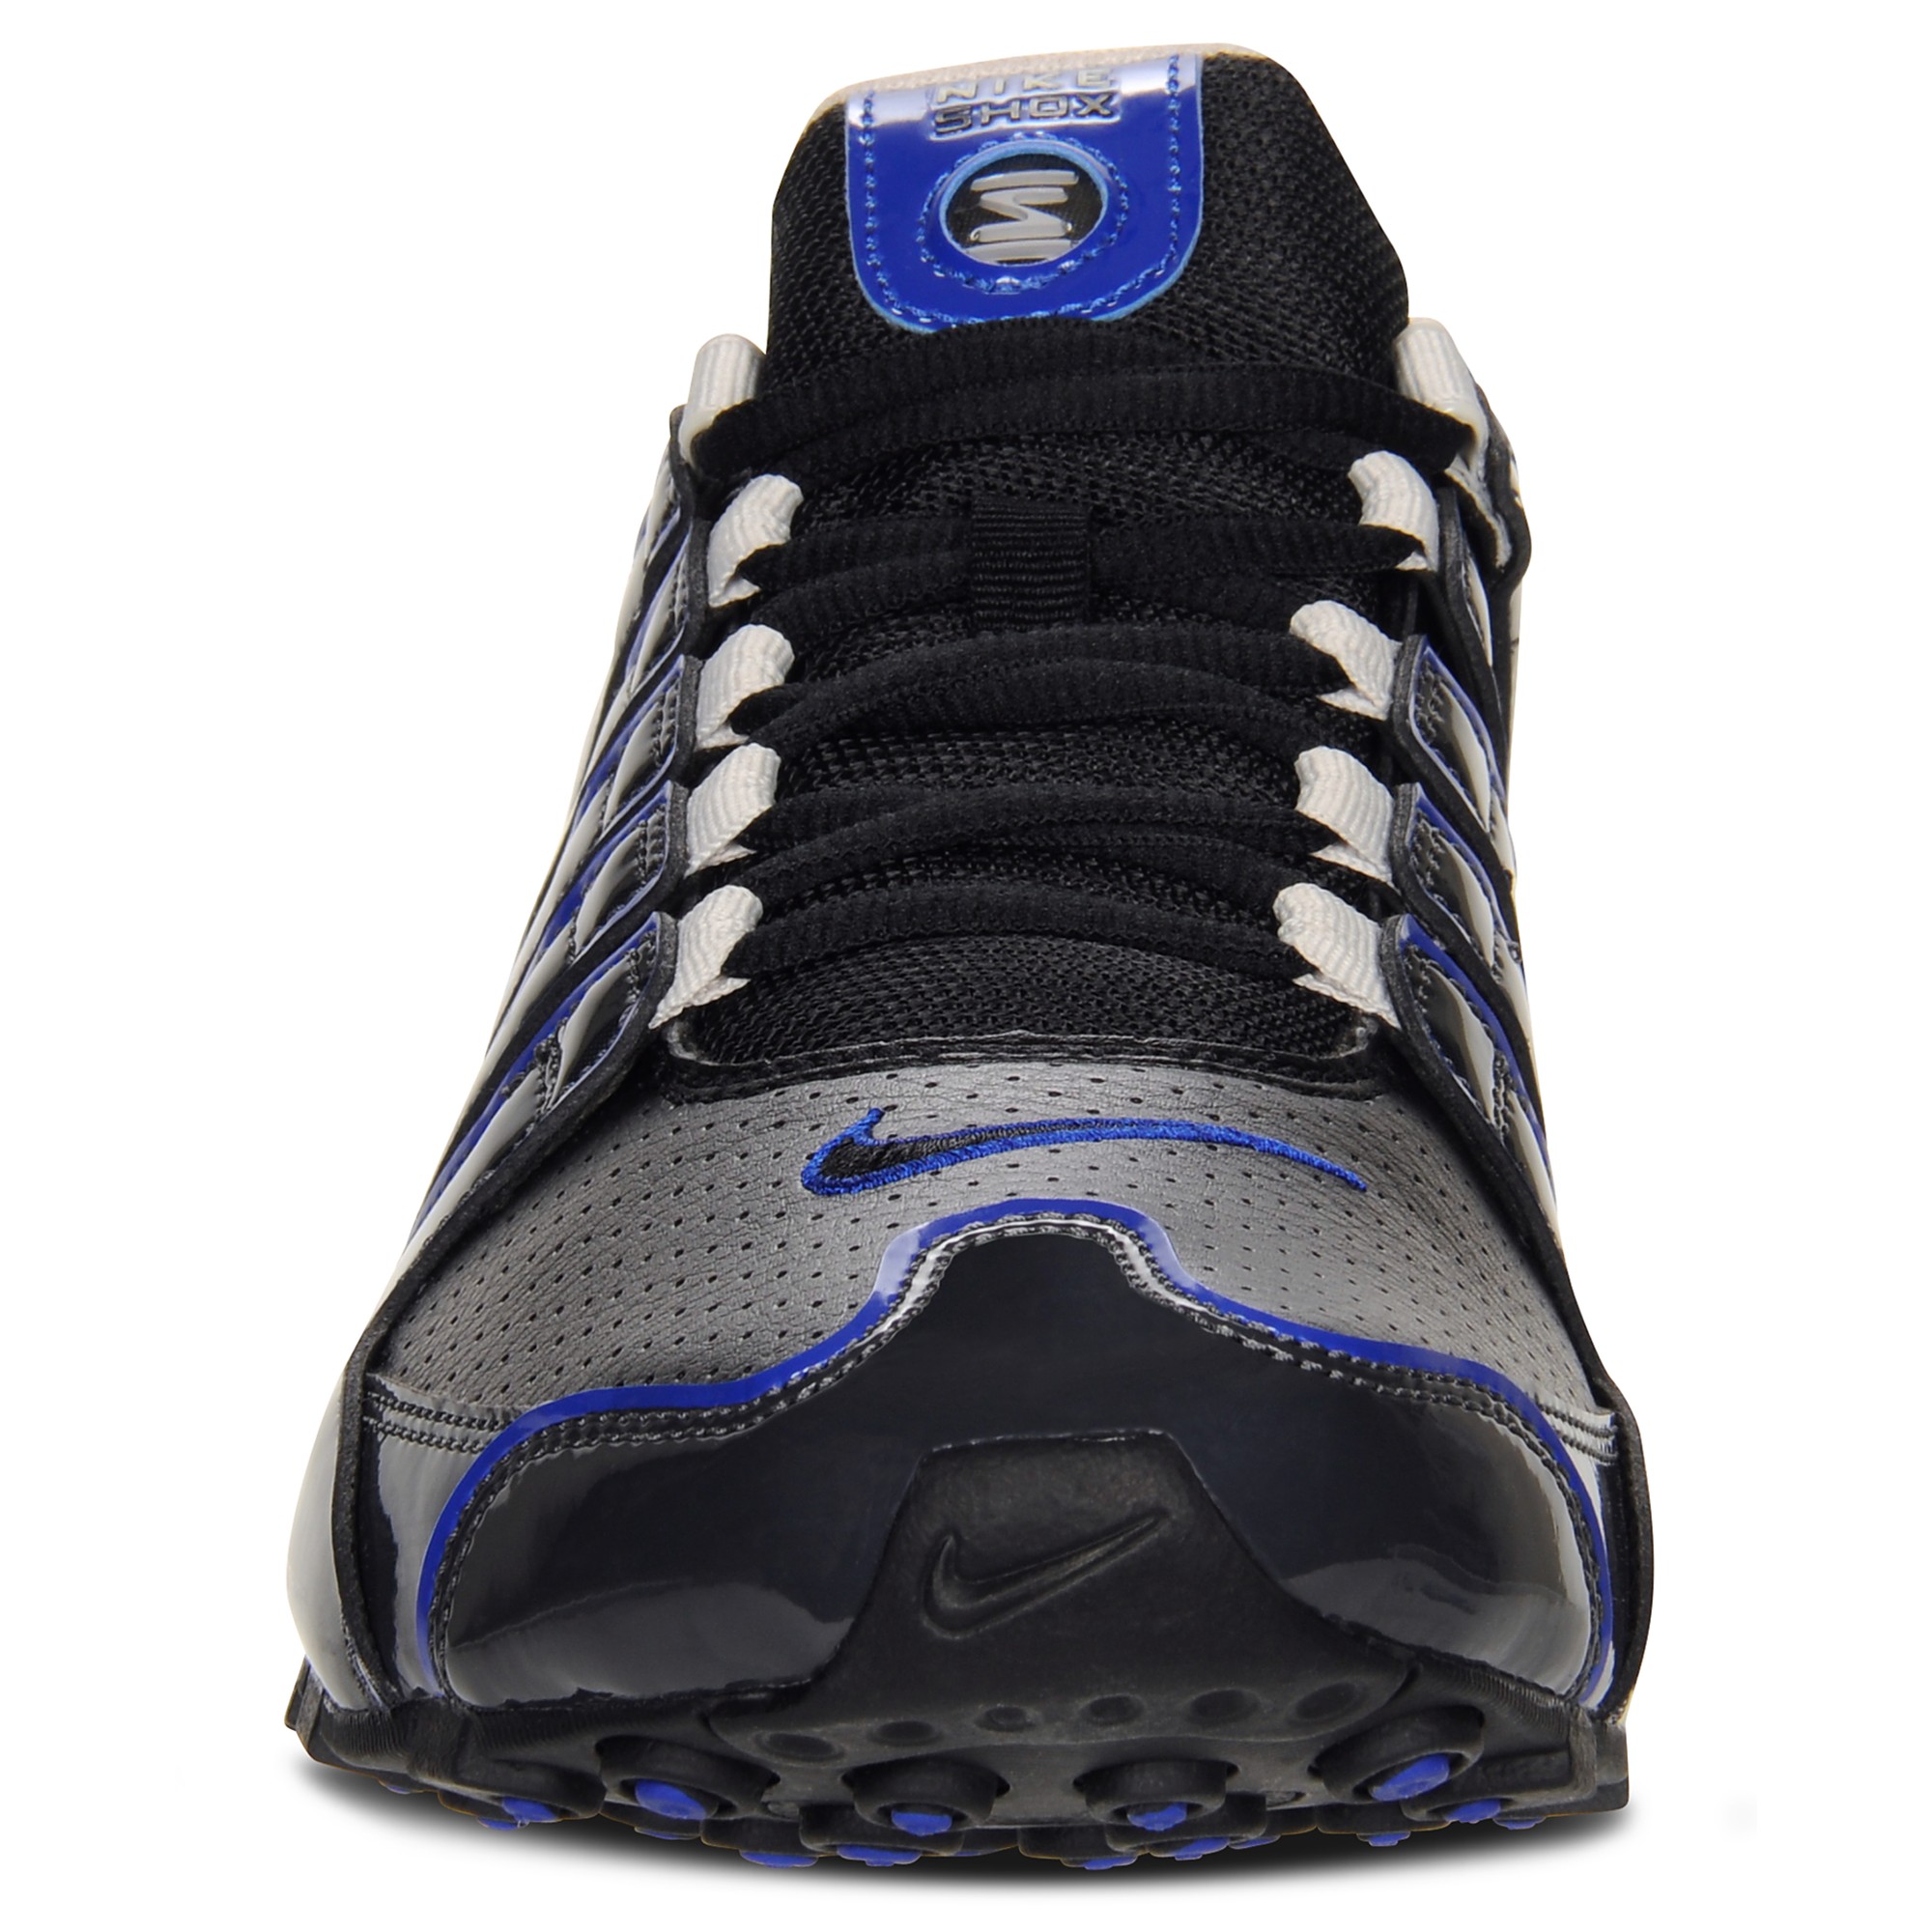 Nike Shox Nz Sneakers in Black/Anthracite/Blue (Black) for Men - Lyst